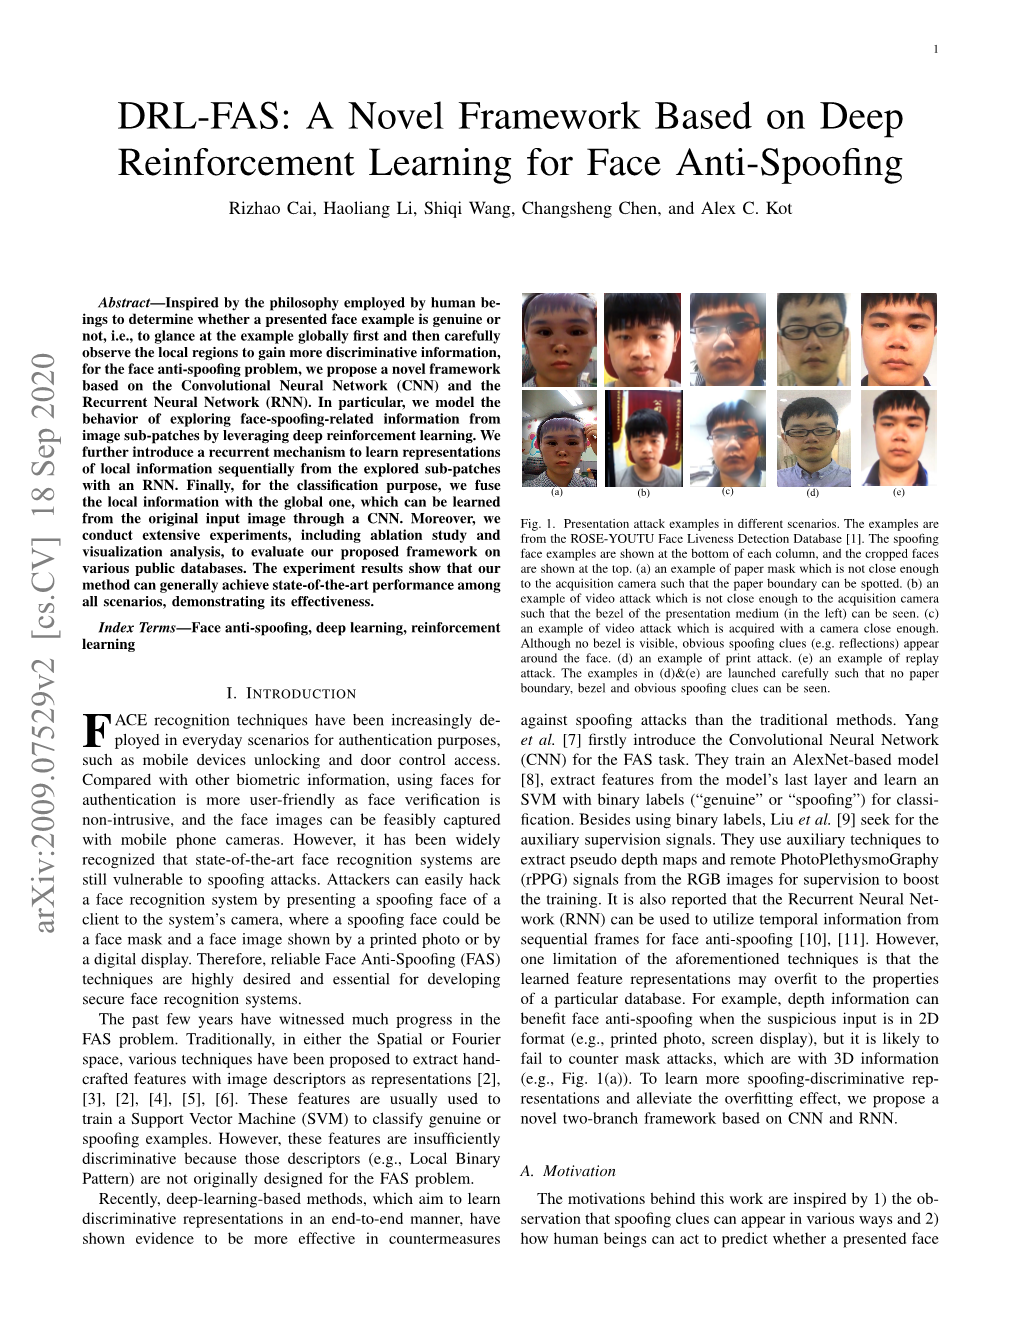 DRL-FAS: a Novel Framework Based on Deep Reinforcement Learning for Face Anti-Spoofing